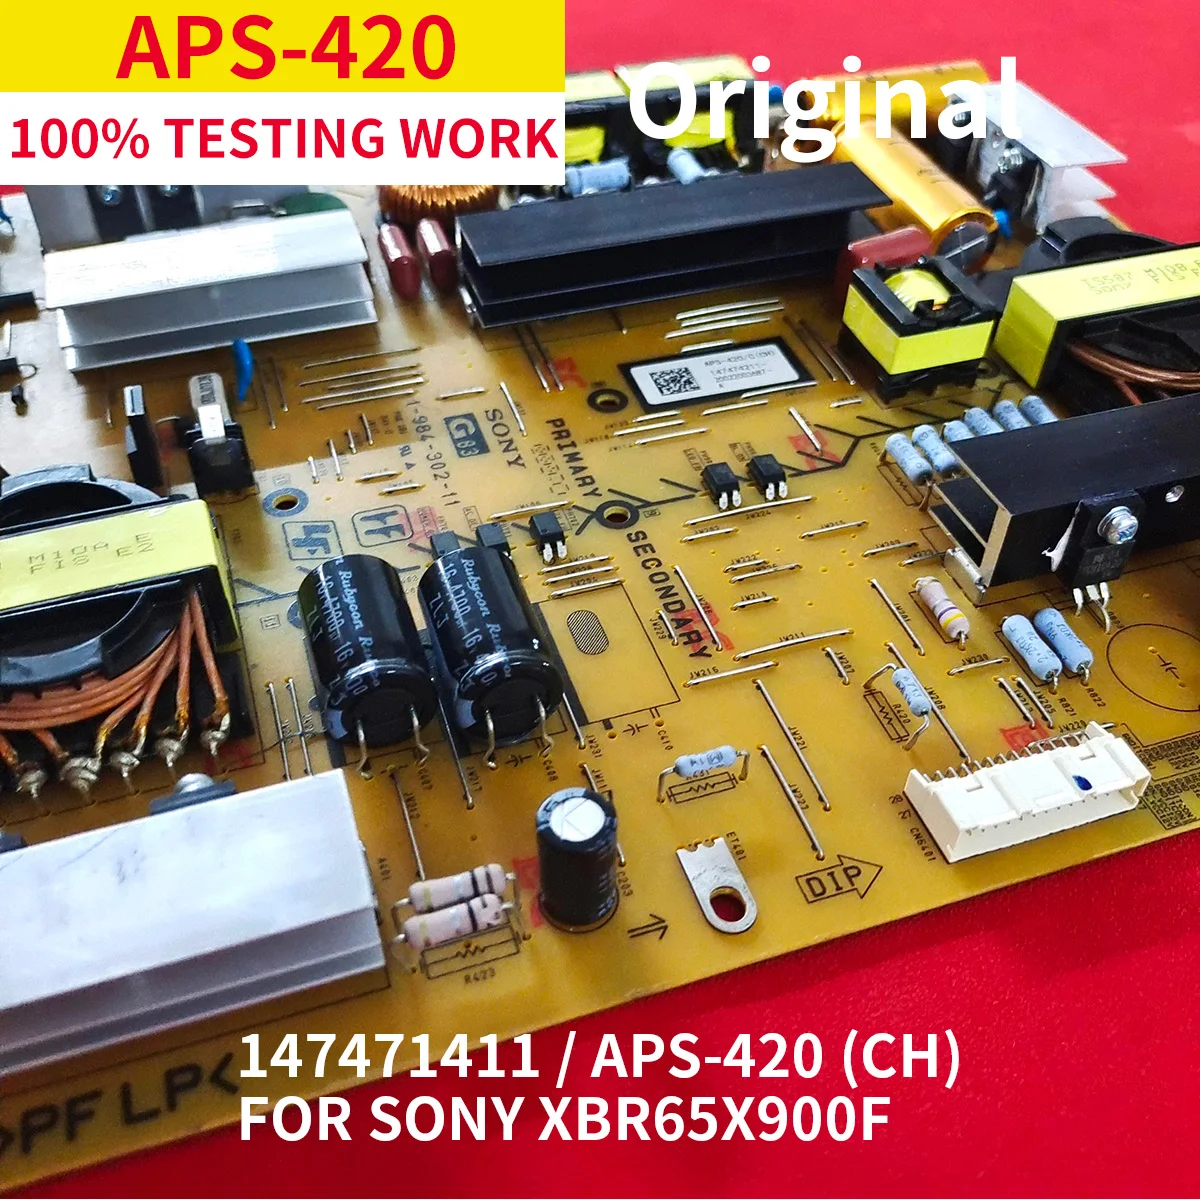 

Power Supply for SONY XBR65X900F TV POWER SUPPLY BOARD 147471411 / APS-420 (CH)